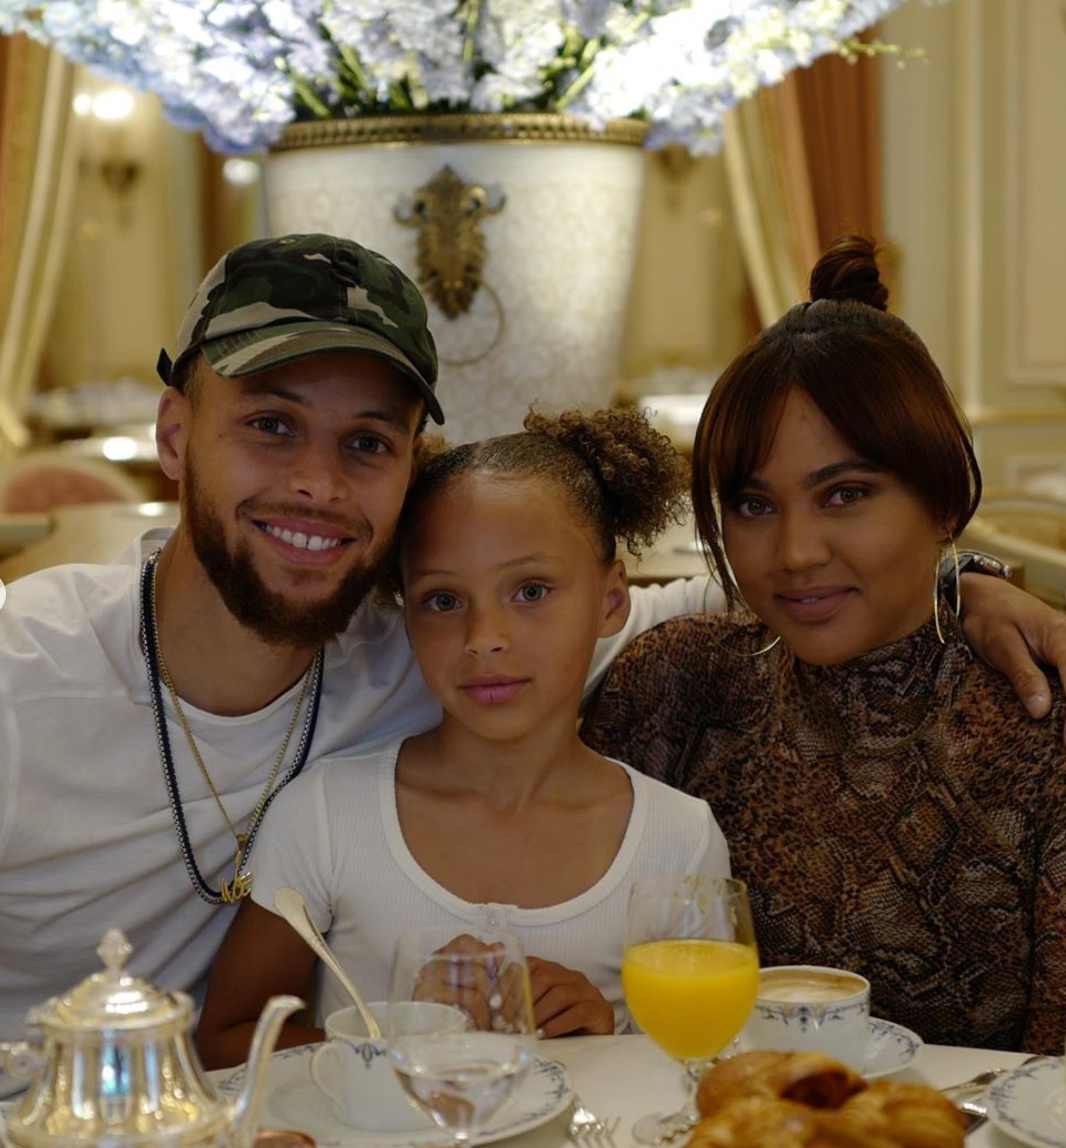 When is Riley Curry's Birthday?